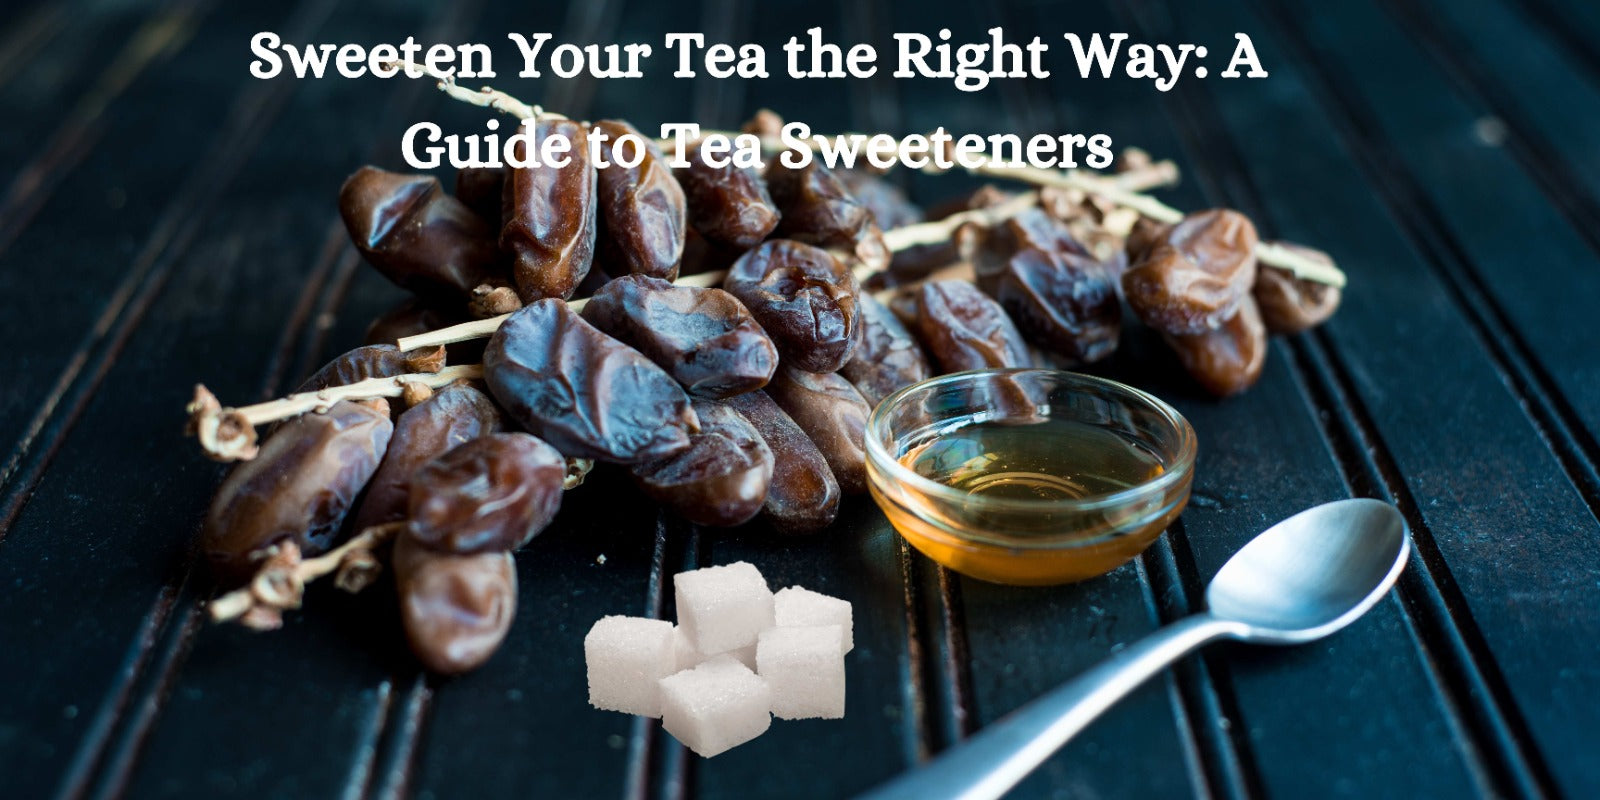 Sweeten Your Tea the Right Way: A Guide to Tea Sweeteners